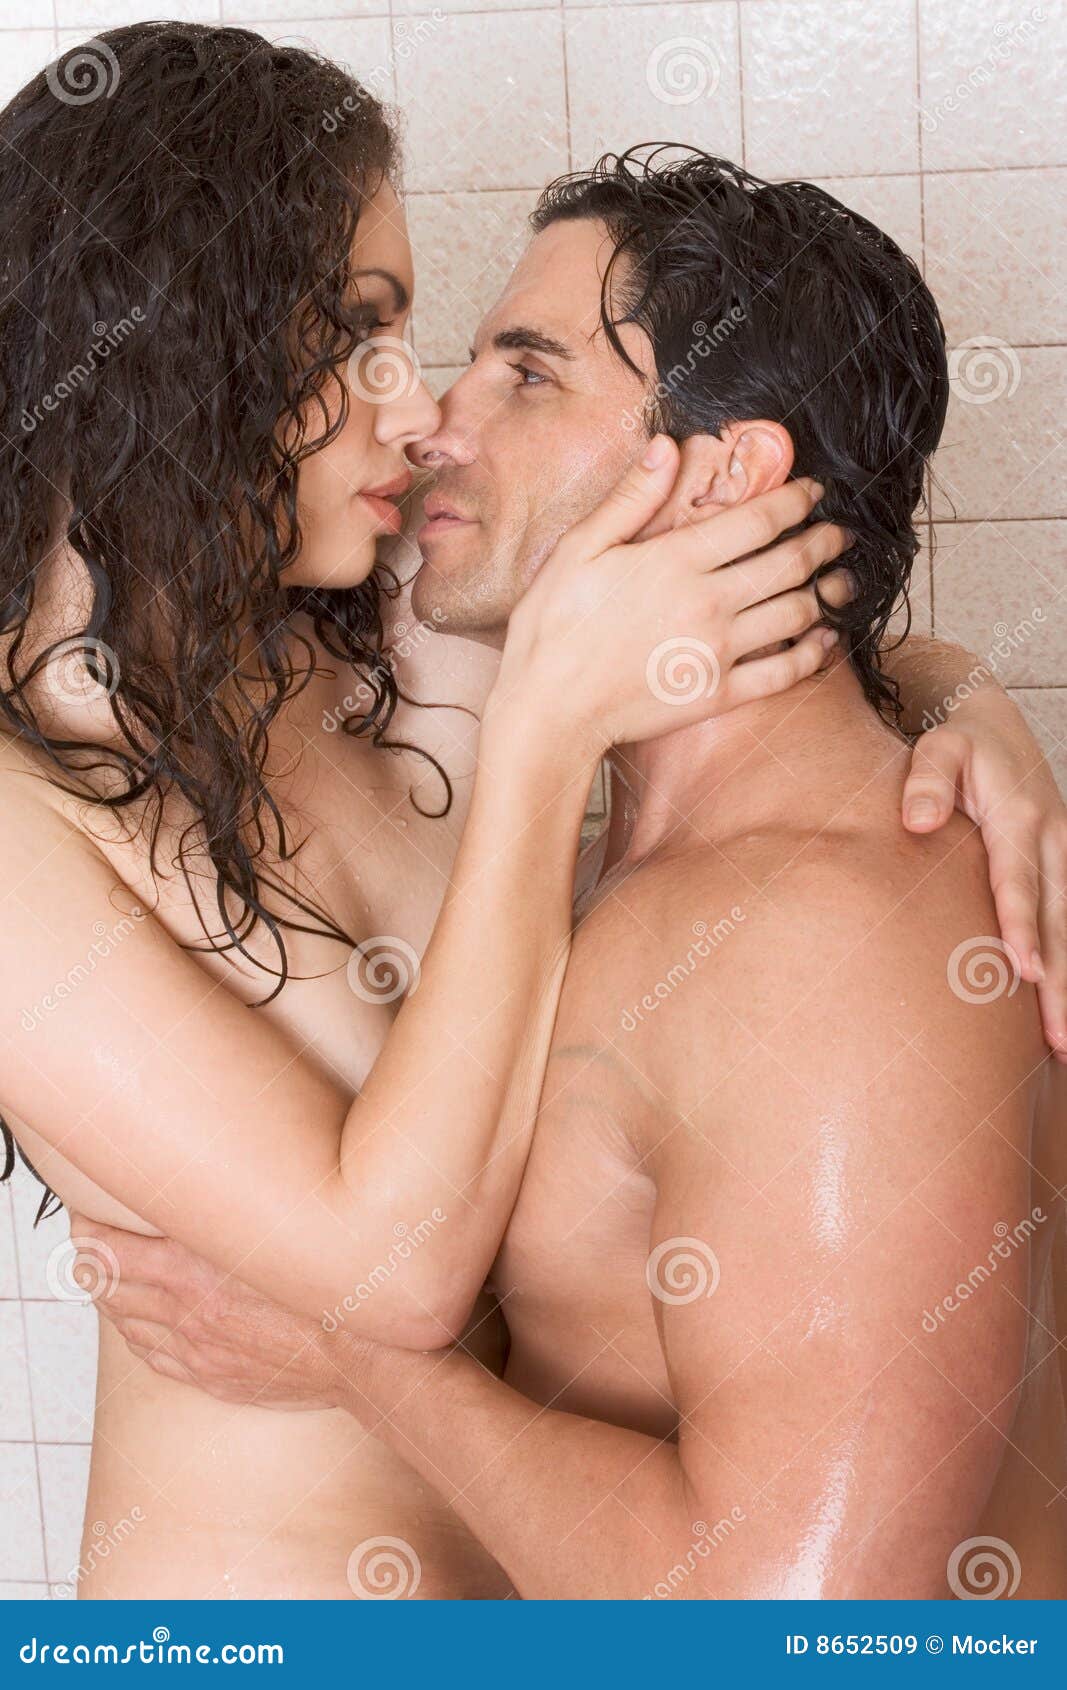 making love naked in the shower